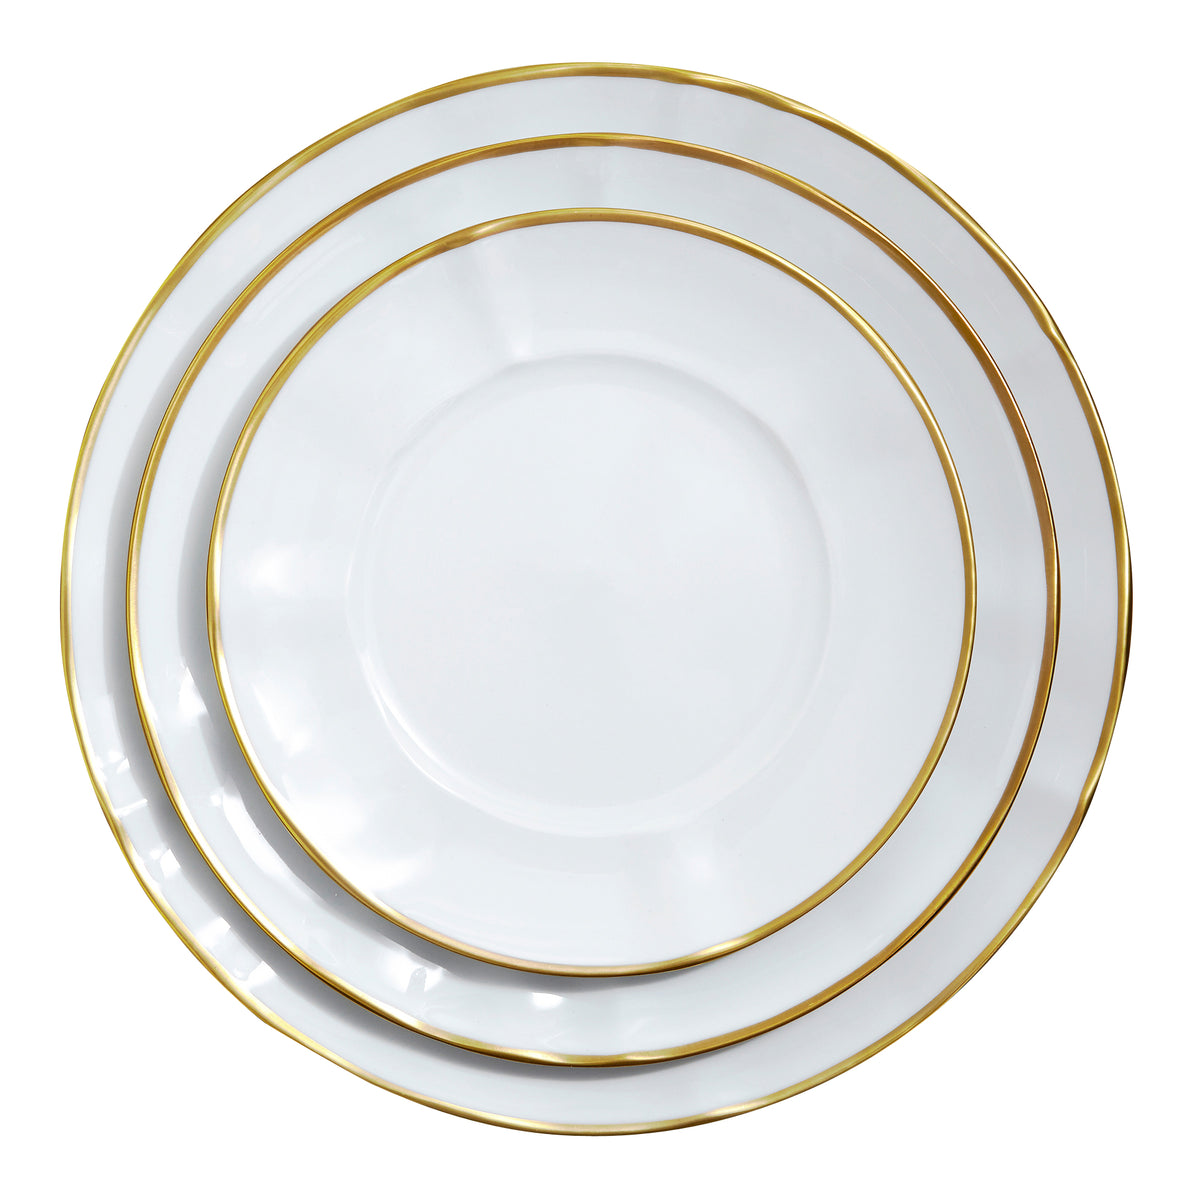 Simply Elegant Gold Charger Plate